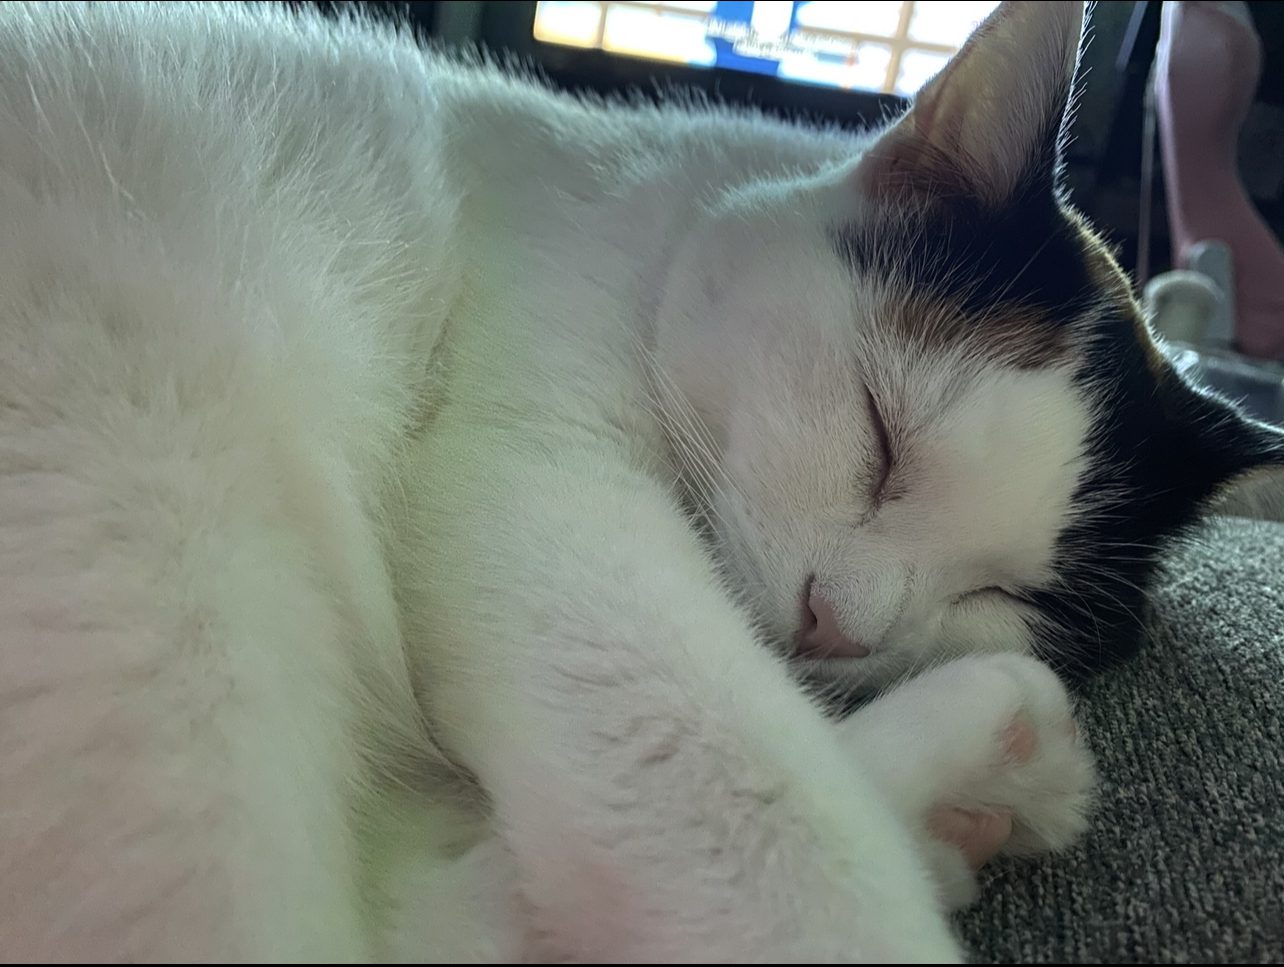 This image depicts a blog about herpes in cats (FHV). Here's a heartwarming photo of a cat sleeping/napping peacefully.